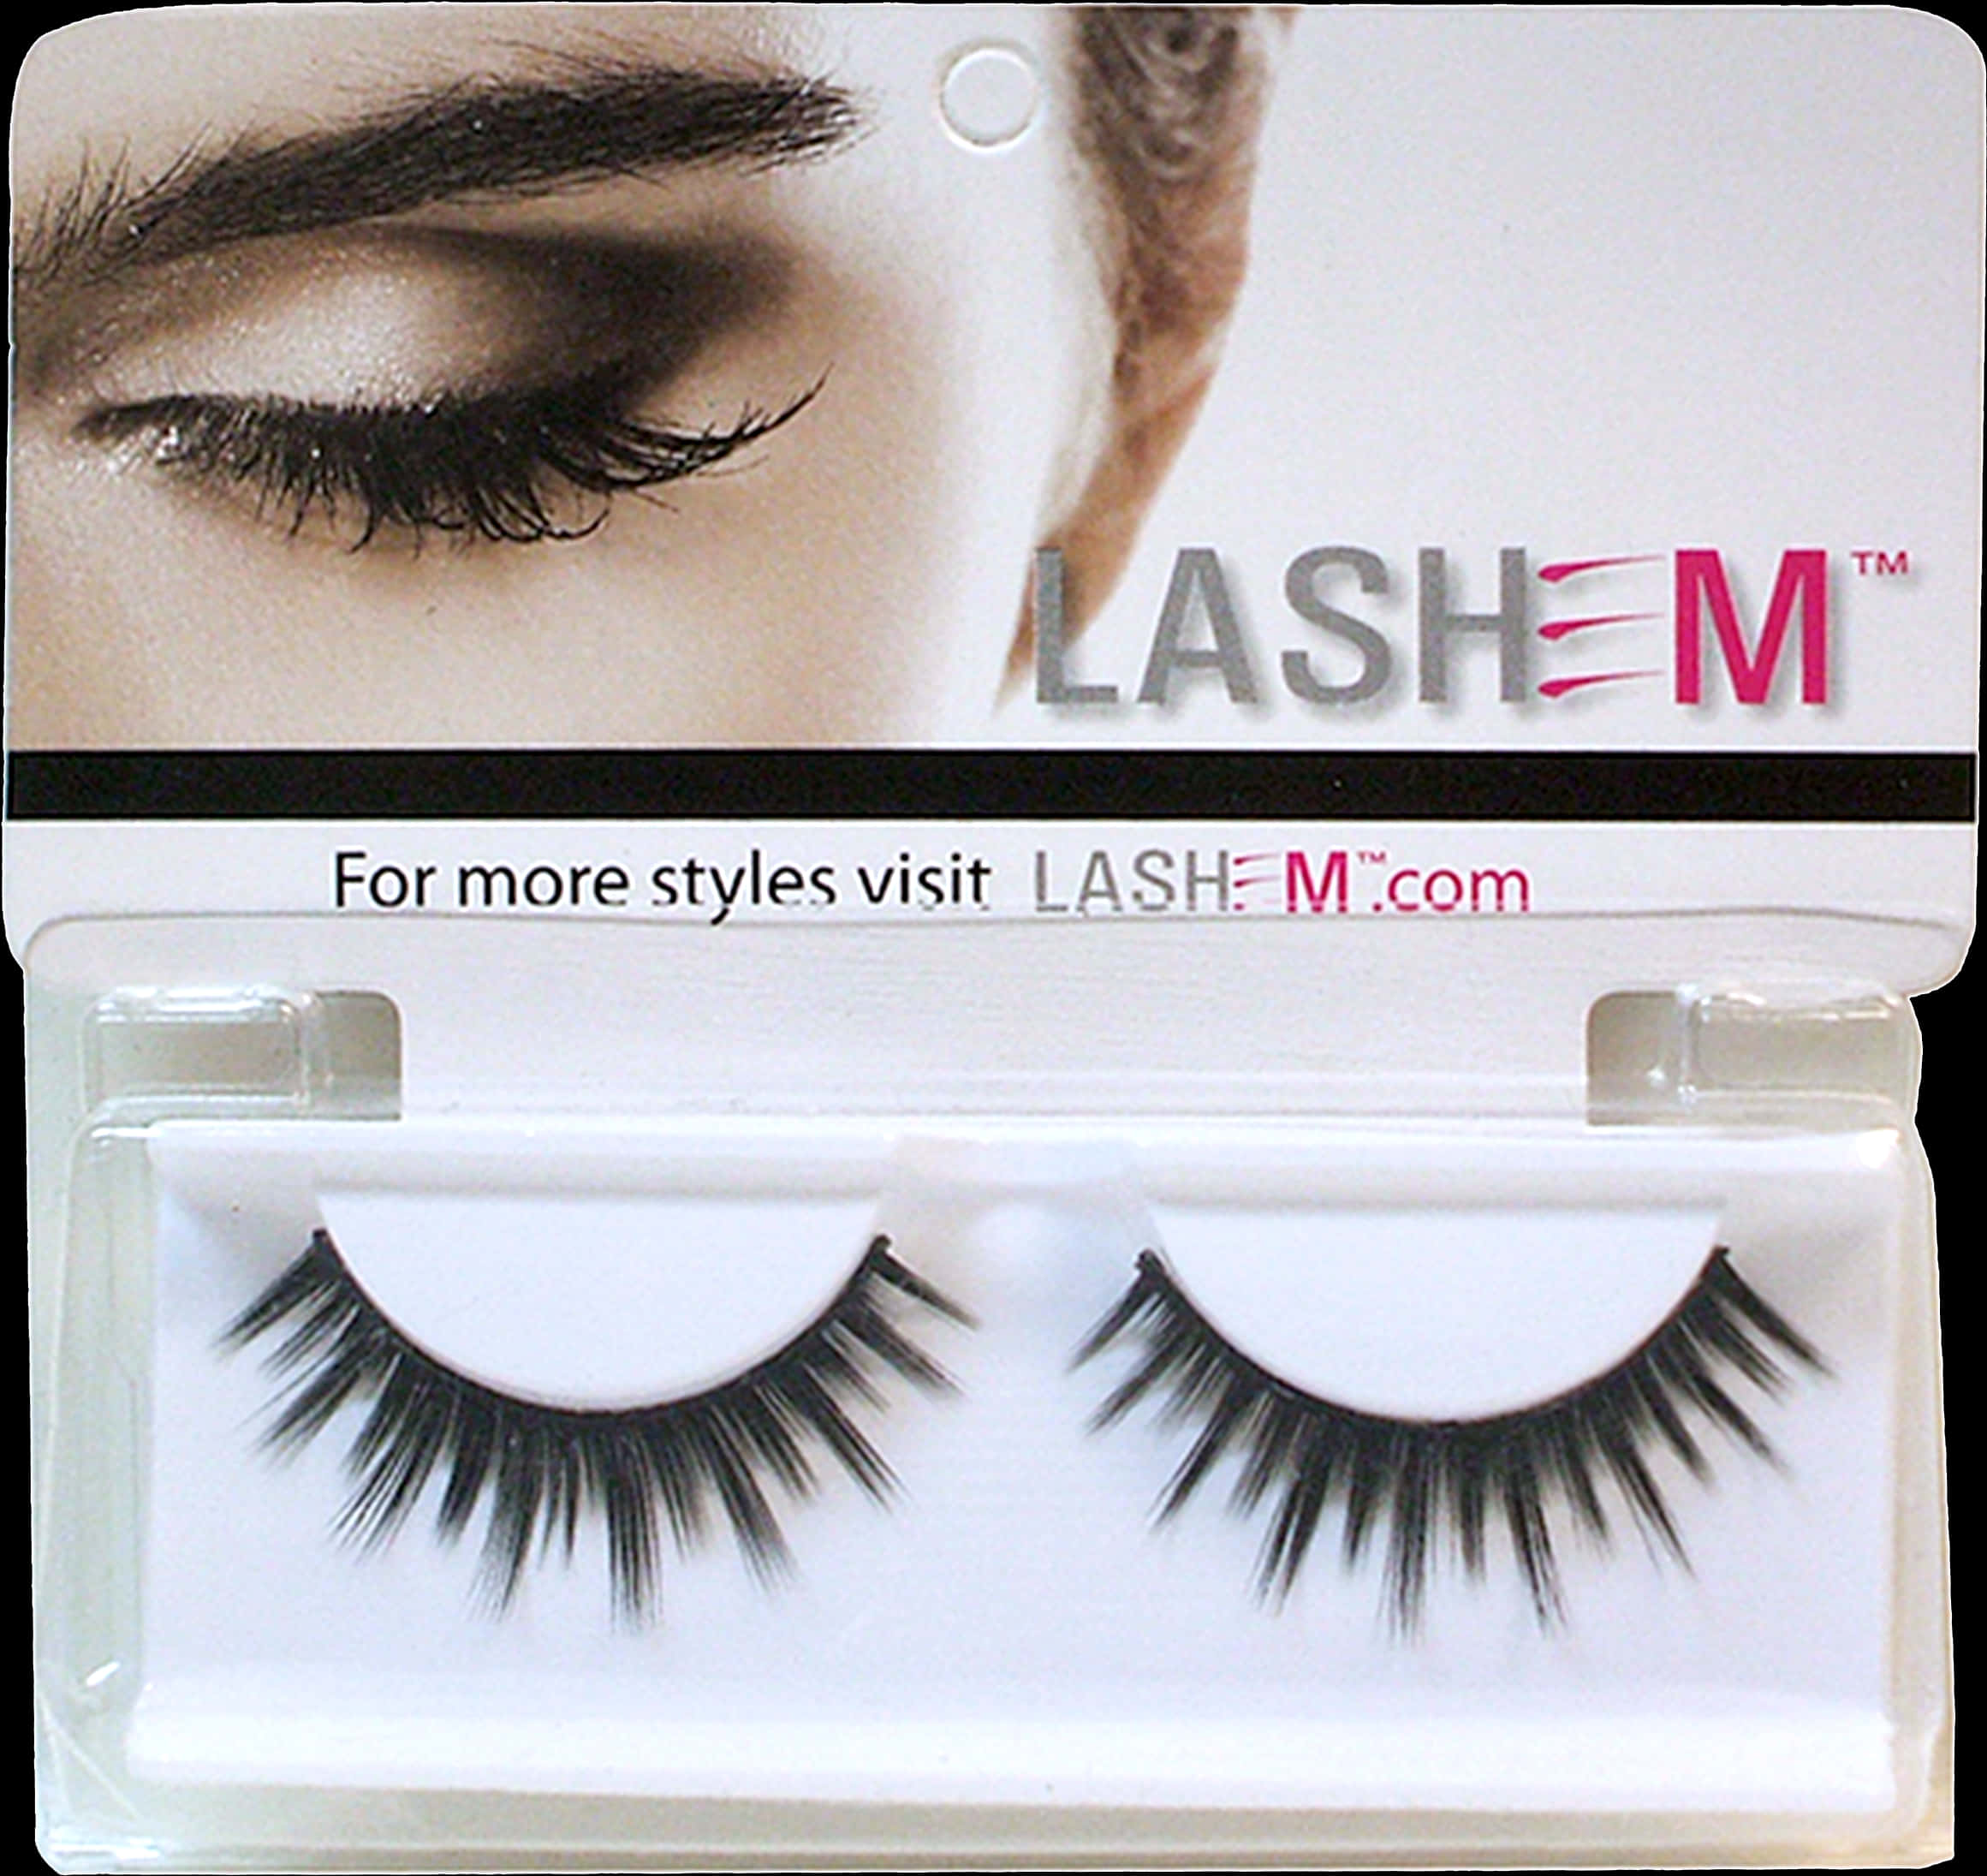 A Pair Of False Eyelashes In A Package